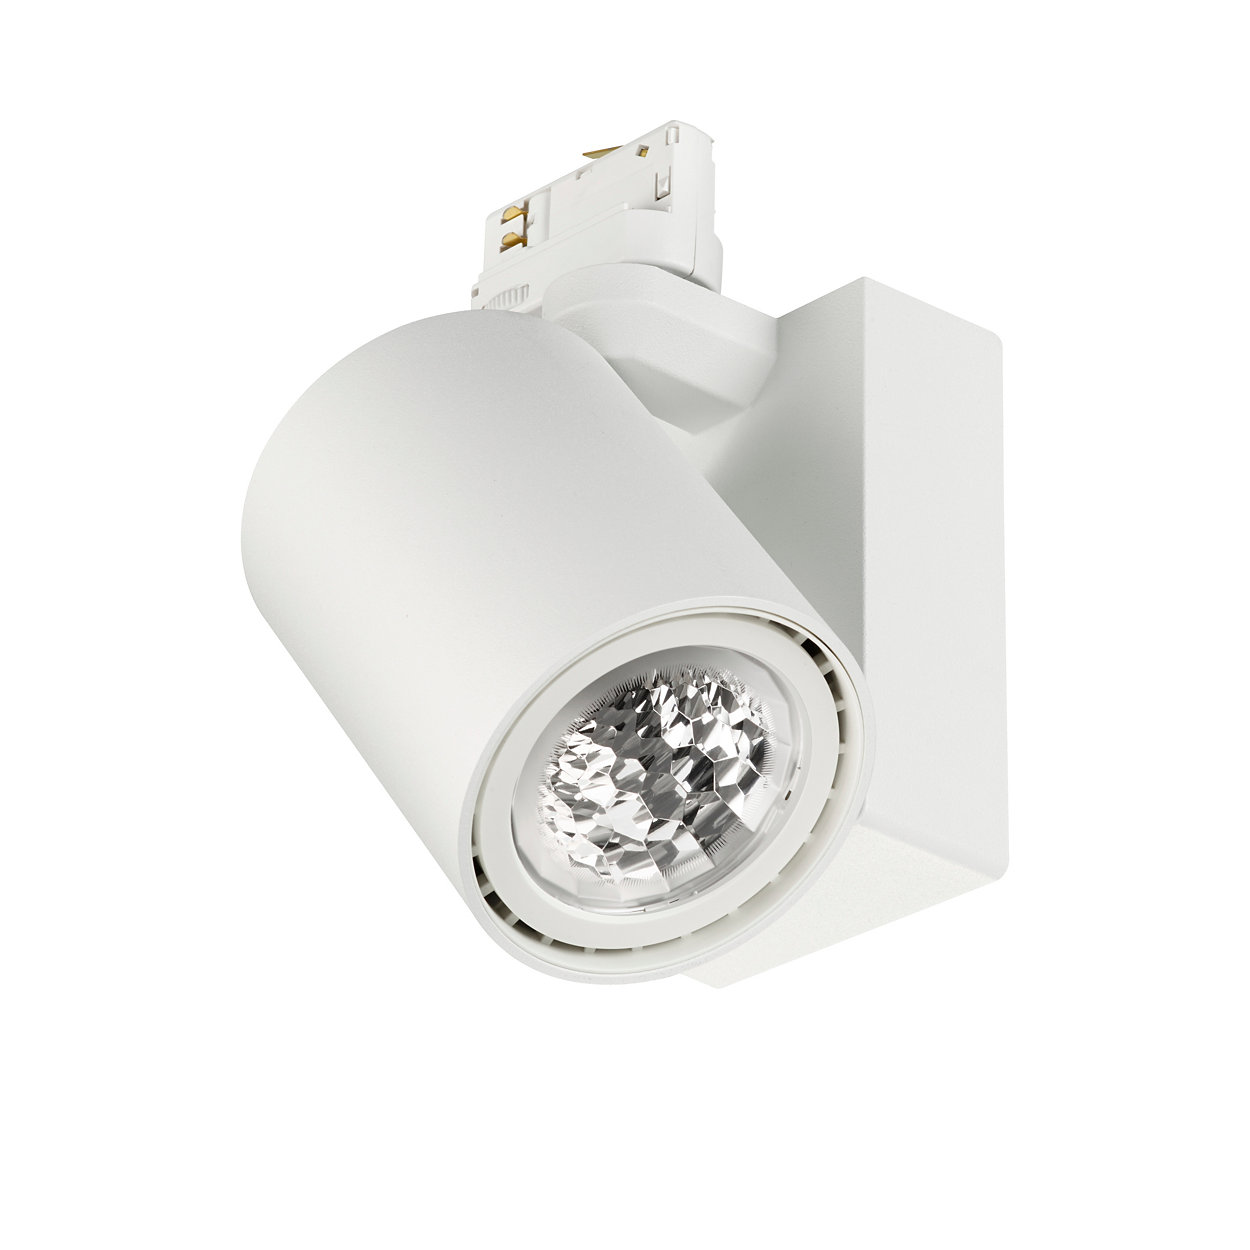 ProAir – an unrivaled combination of light quality and efficiency